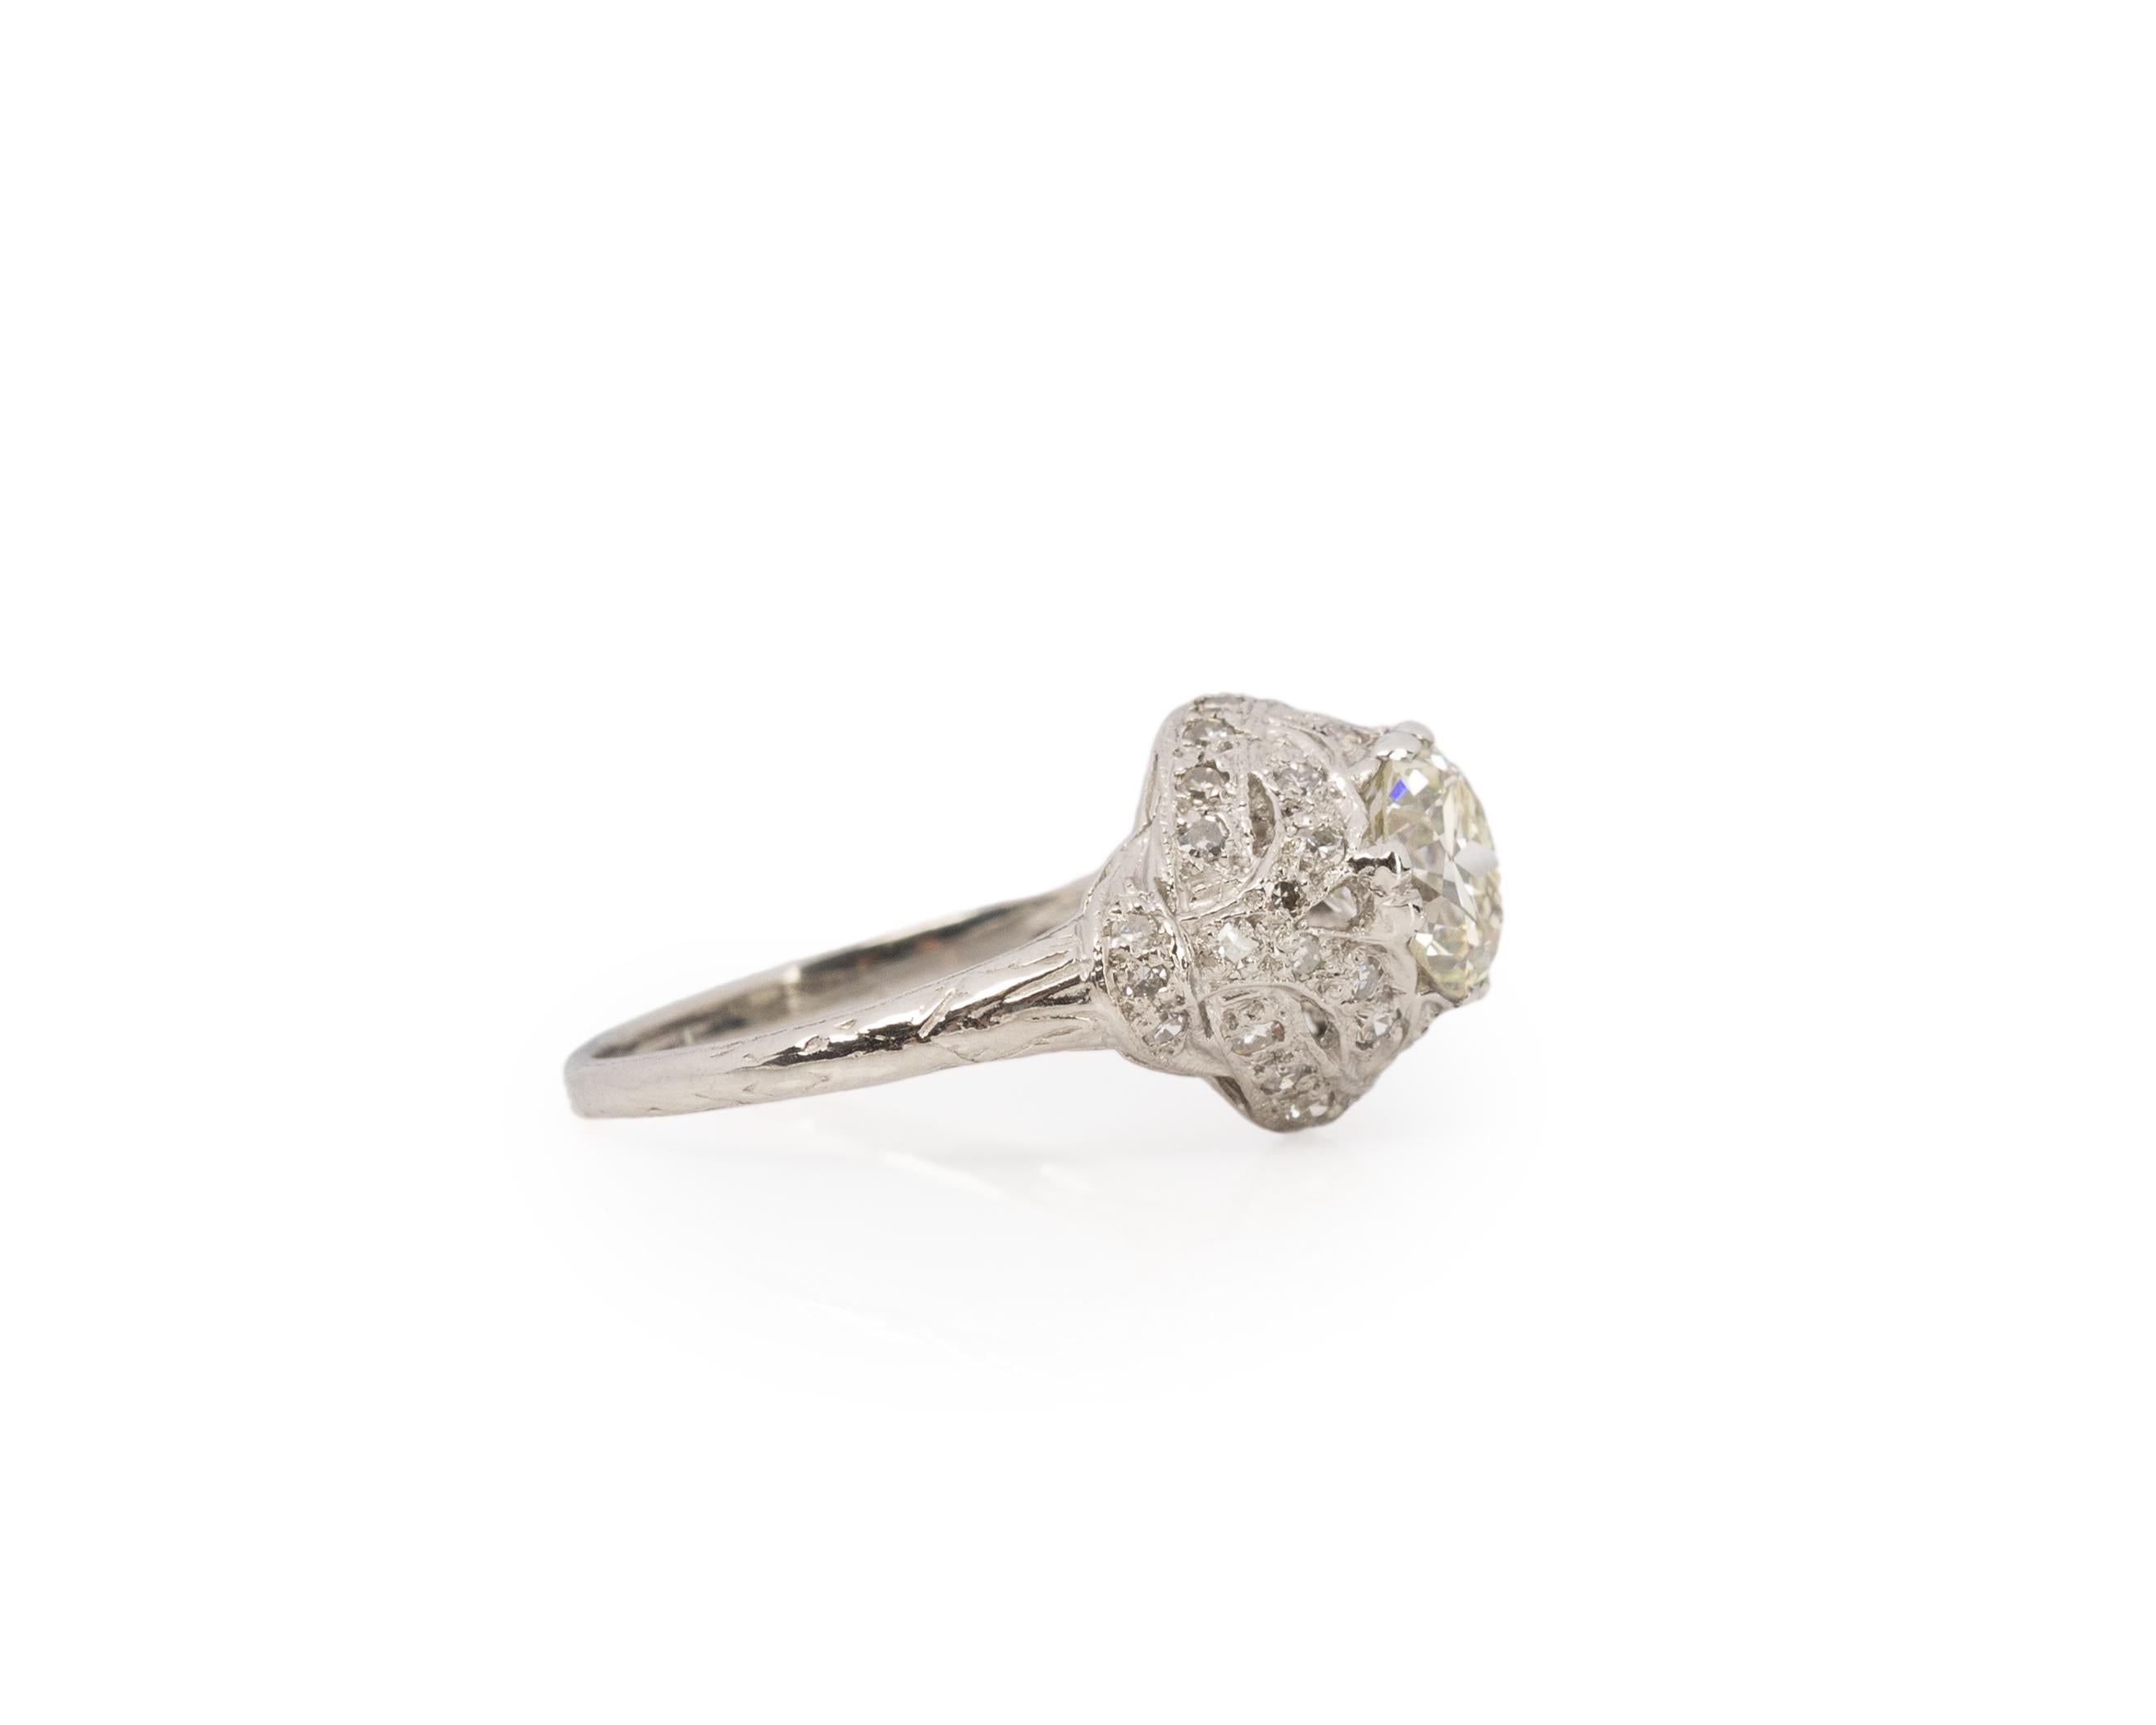 Ring Size: 7
Metal Type: Platinum [Hallmarked, and Tested]
Weight: 4.5 grams

Center Diamond Details:
GIA LAB REPORT #: 7458903834
Weight: 1.39ct
Cut: Old European brilliant
Color: N
Clarity: VS1
Measurements: 7.20mm x 6.99mm x 4.48mm

Side Diamond